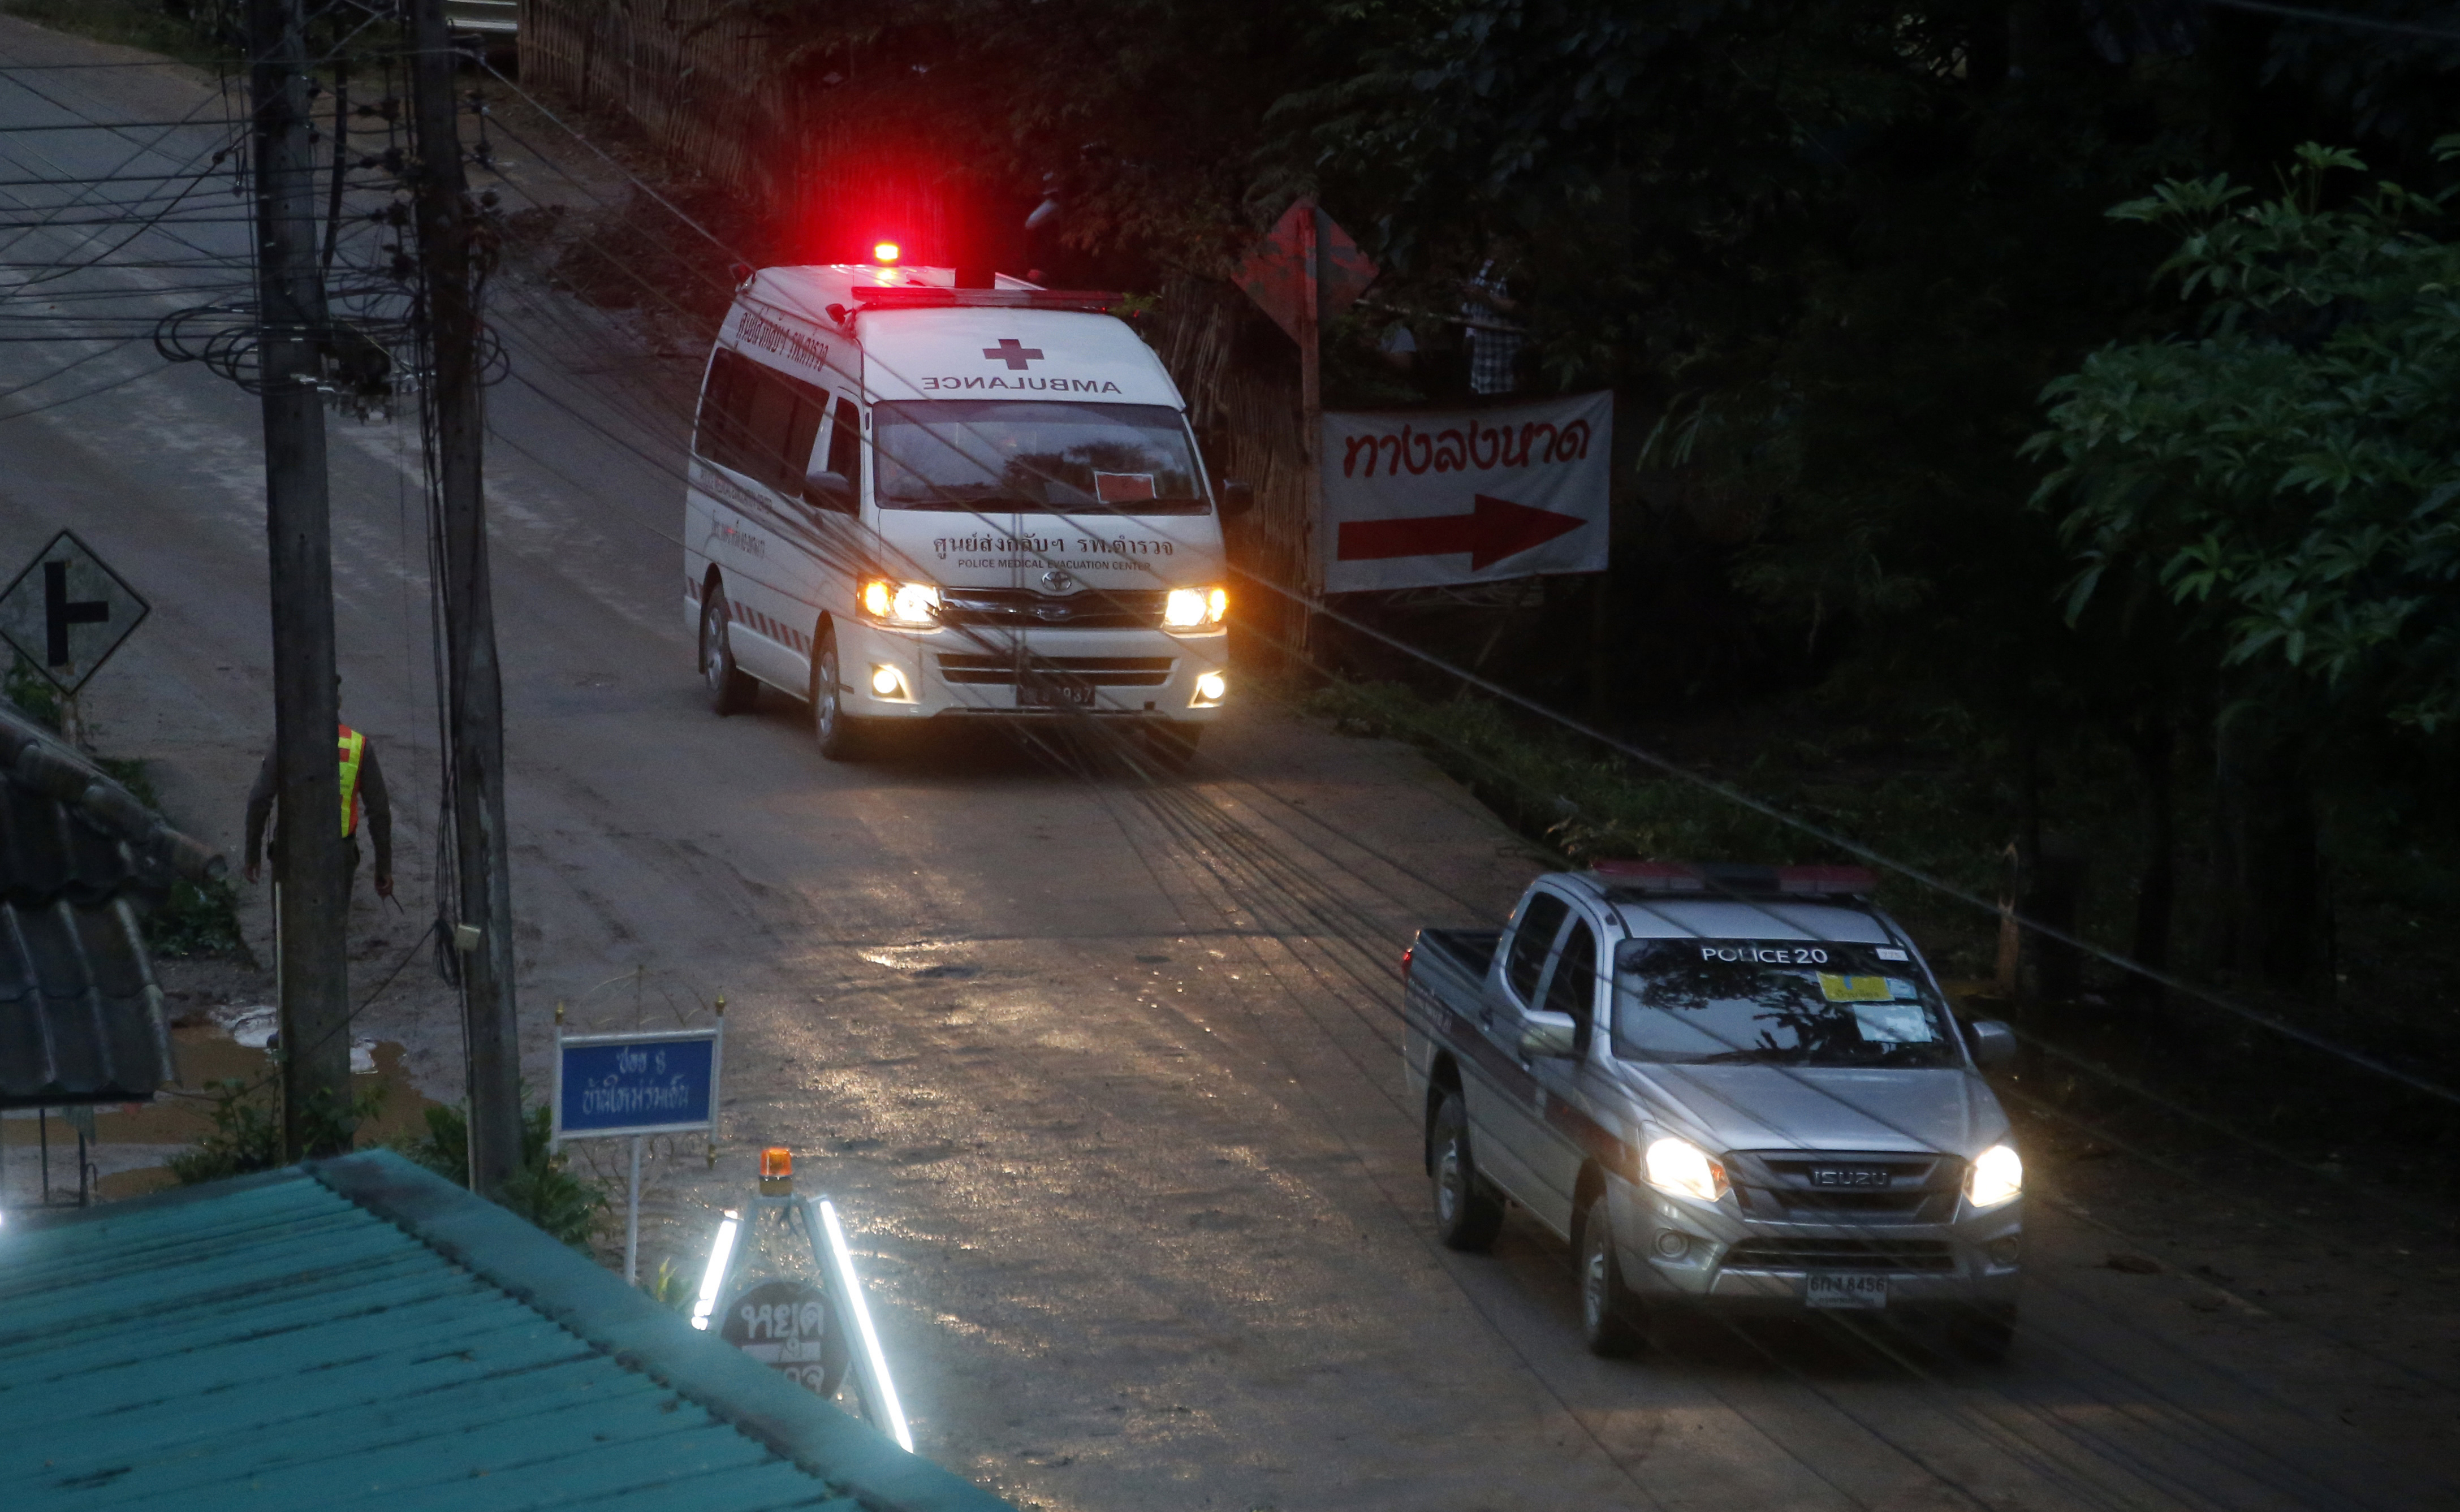 The Latest: Thai soccer team saved from flooded cave